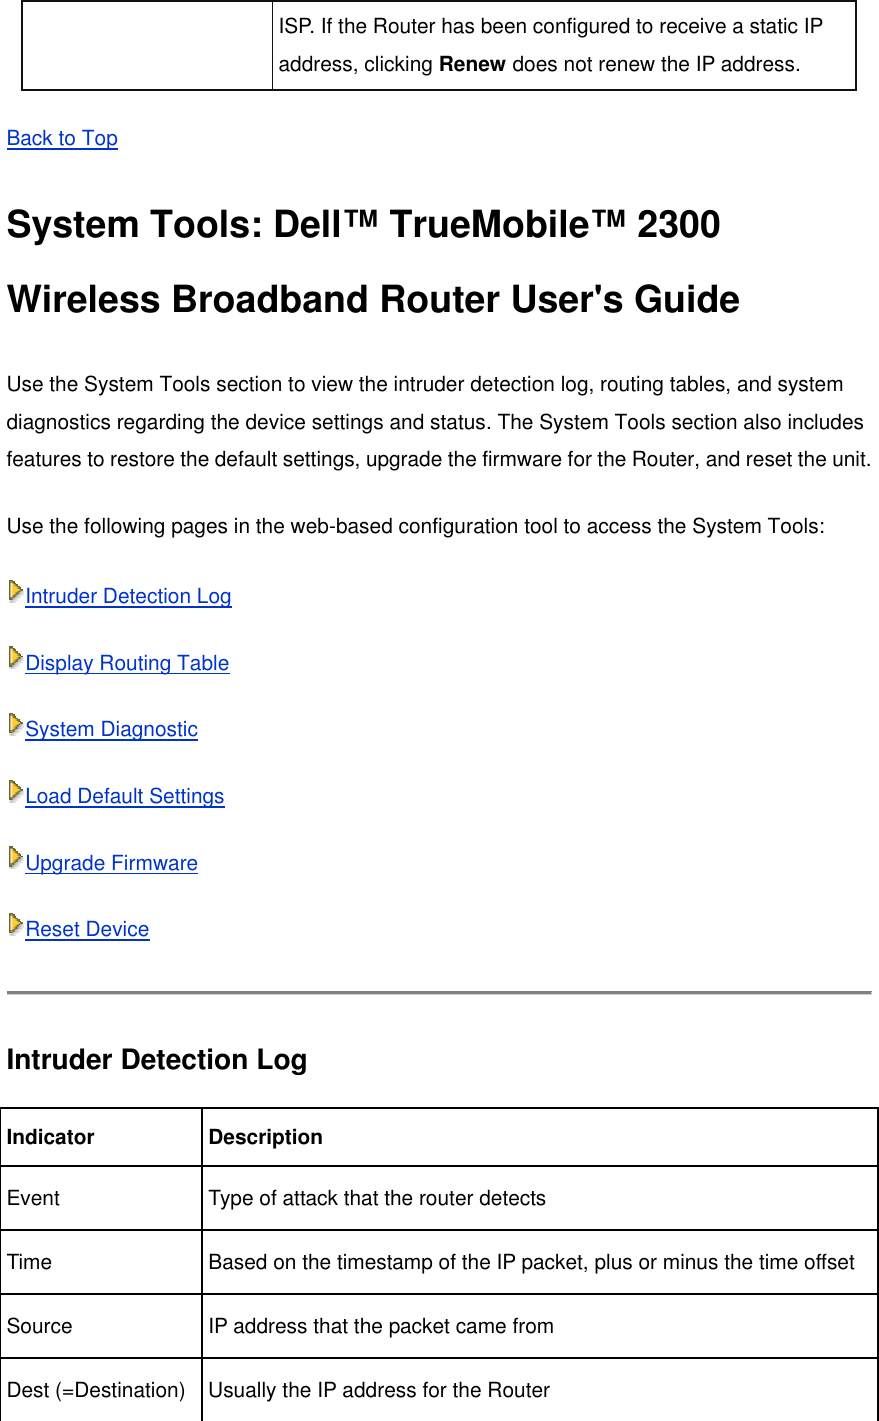 ISP. If the Router has been configured to receive a static IP address, clicking Renew does not renew the IP address. Back to Top  System Tools: Dell™ TrueMobile™ 2300 Wireless Broadband Router User&apos;s Guide Use the System Tools section to view the intruder detection log, routing tables, and system diagnostics regarding the device settings and status. The System Tools section also includes features to restore the default settings, upgrade the firmware for the Router, and reset the unit. Use the following pages in the web-based configuration tool to access the System Tools: Intruder Detection Log  Display Routing Table  System Diagnostic Load Default Settings  Upgrade Firmware  Reset Device  Intruder Detection Log Indicator Description Event  Type of attack that the router detects Time  Based on the timestamp of the IP packet, plus or minus the time offset Source  IP address that the packet came from Dest (=Destination) Usually the IP address for the Router 